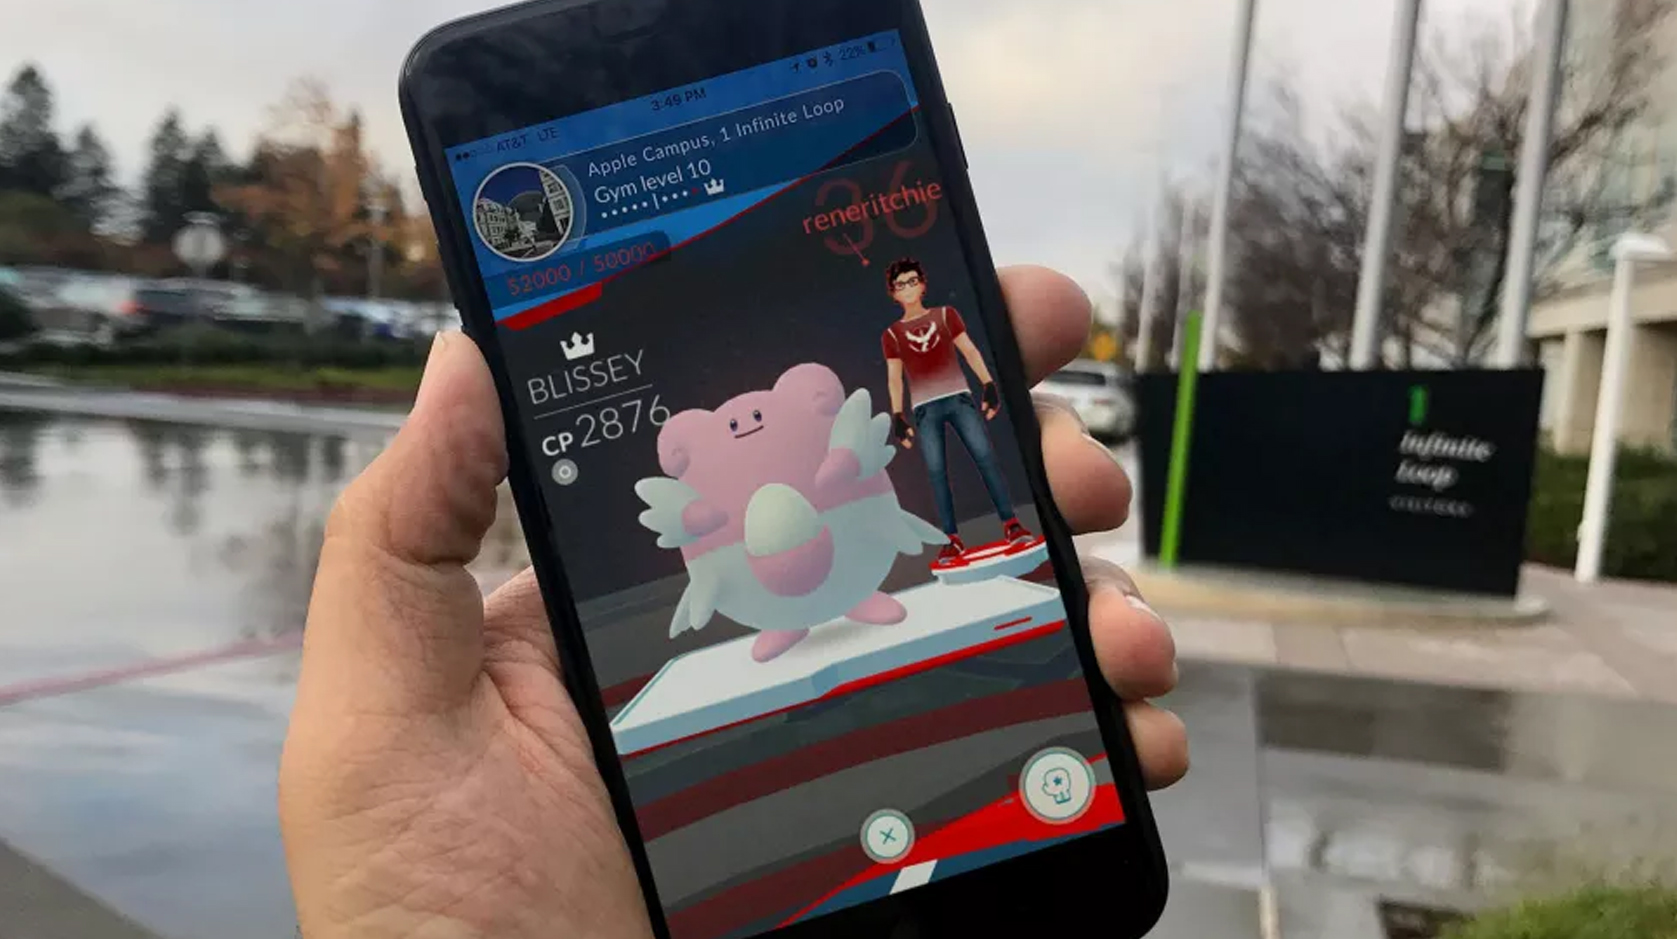 How to power up and evolve Pokémon in Pokémon Go, with special